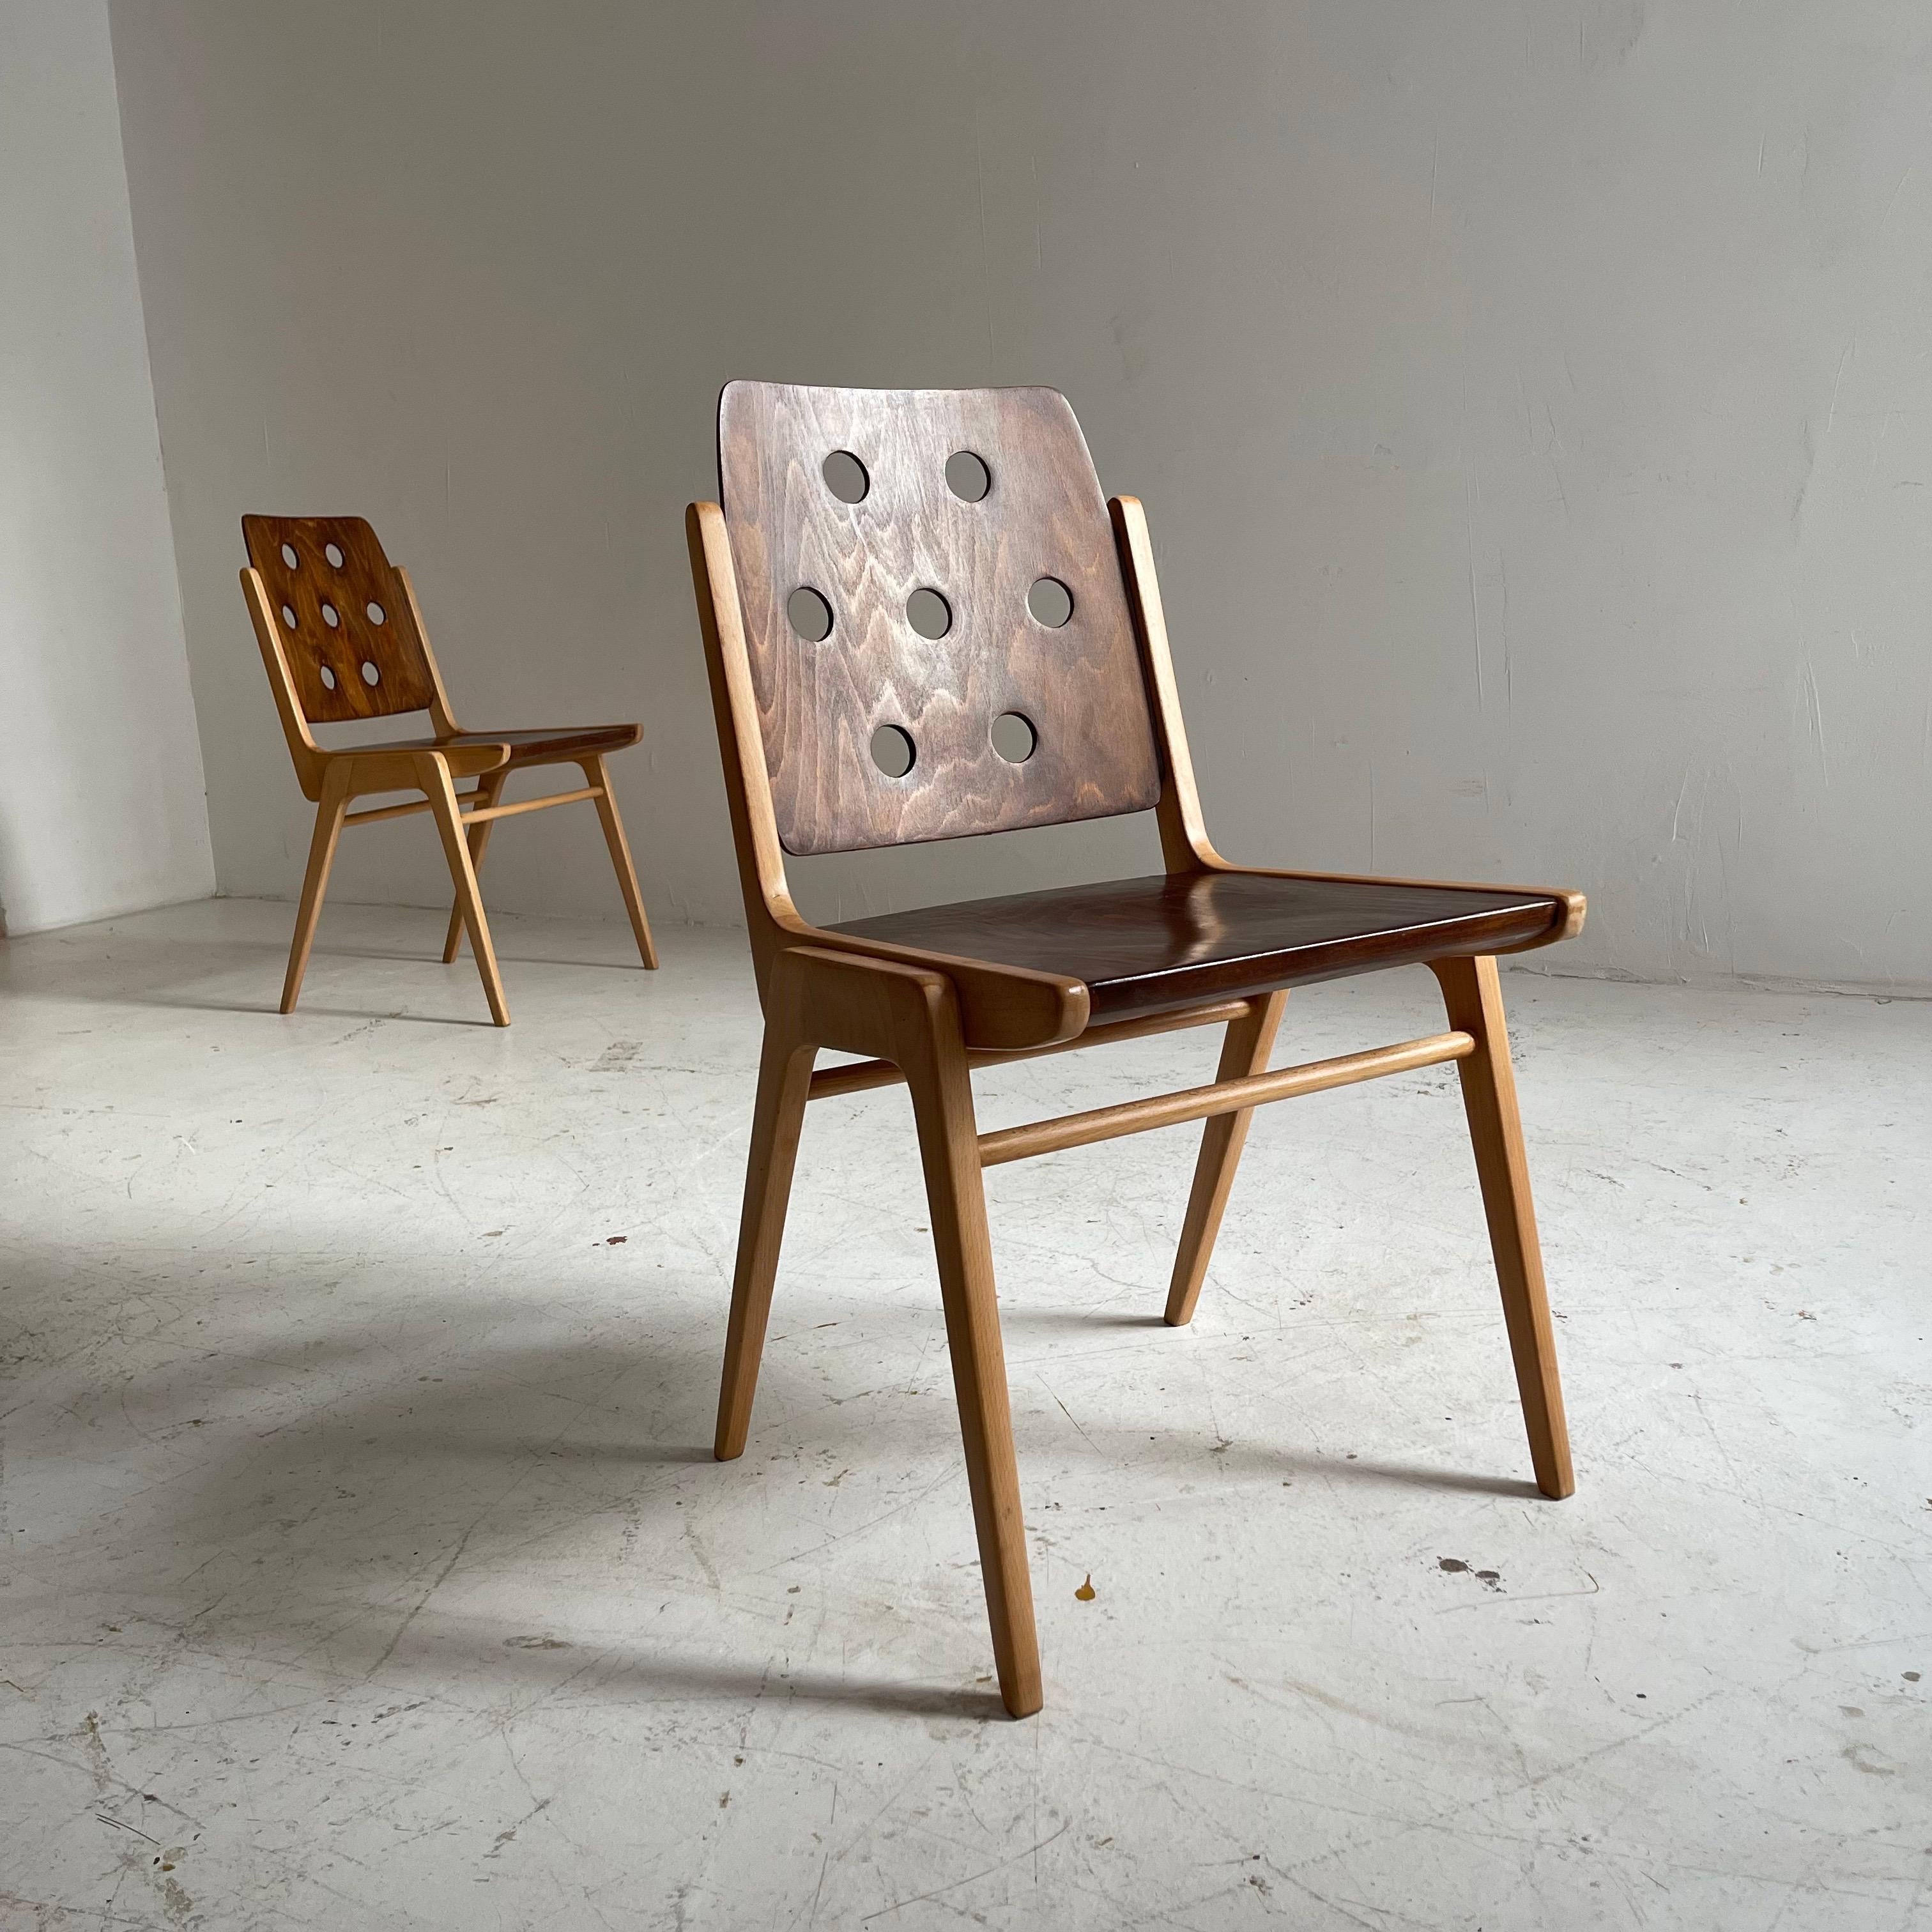 Franz Schuster Stacking Chair Set of Two, Austria 1955 For Sale 3